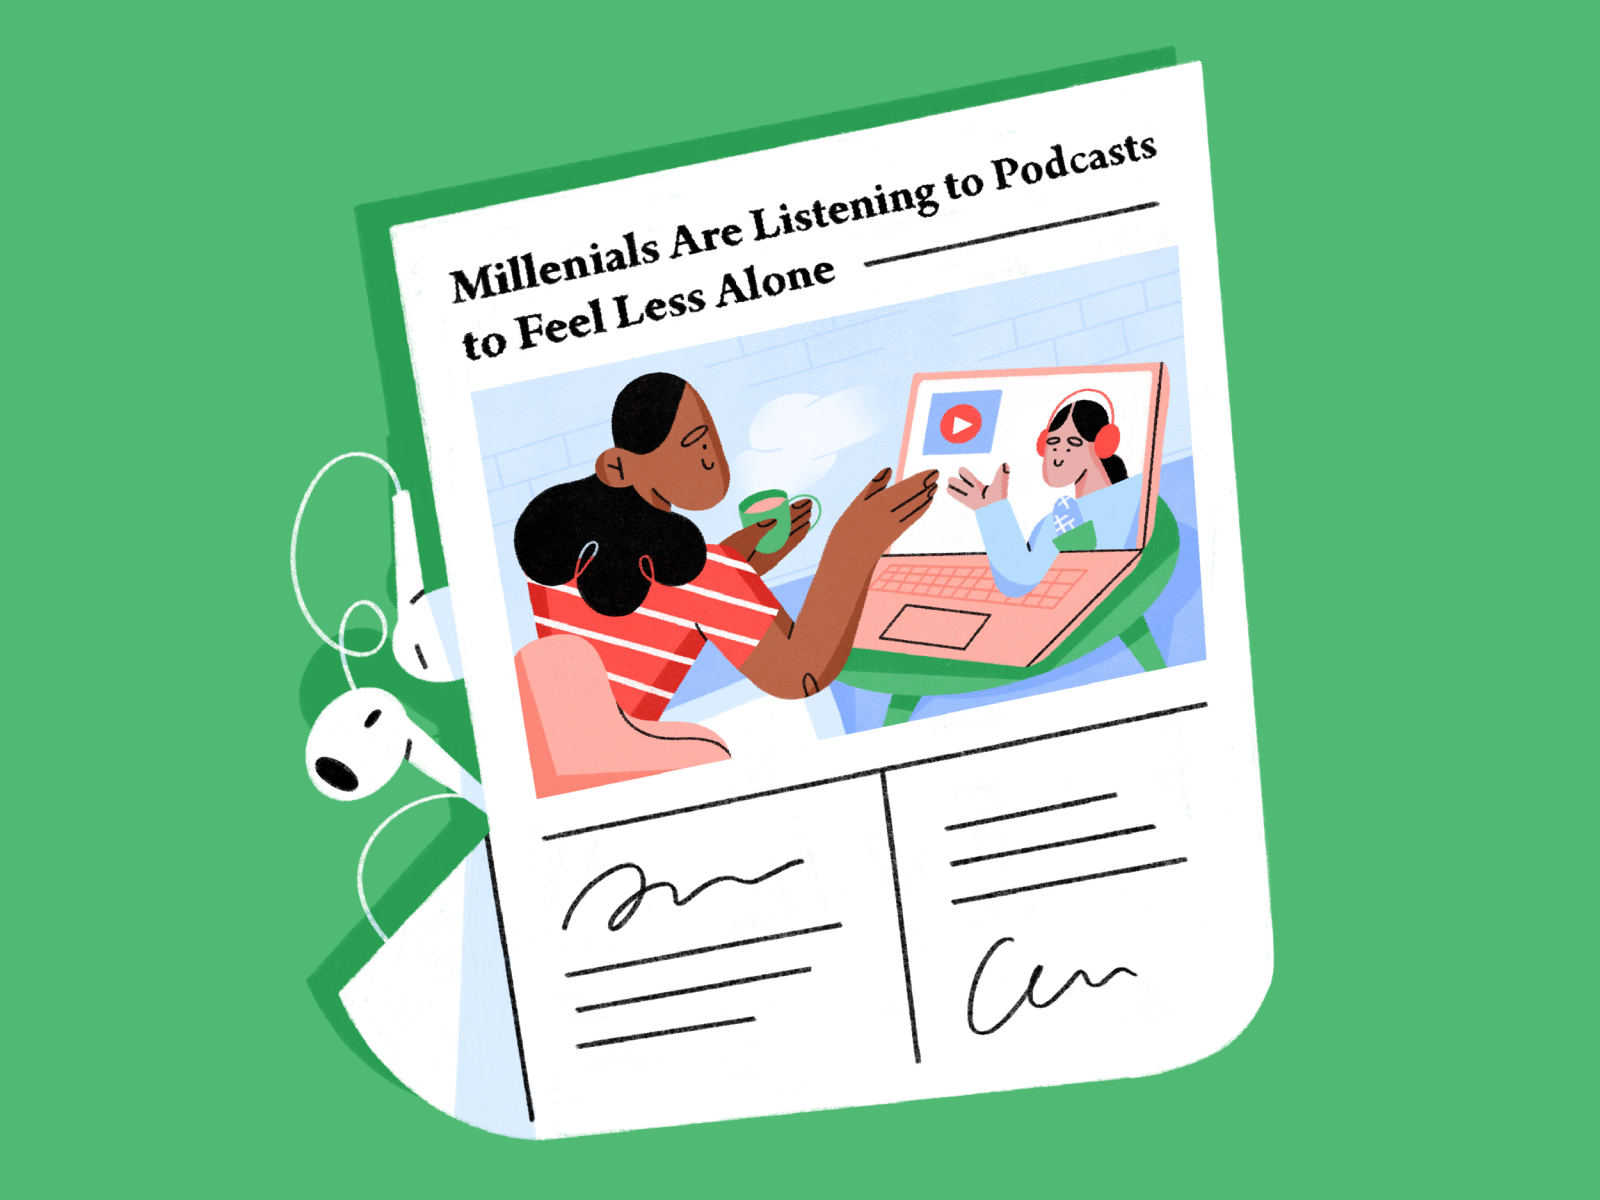 podcasts are your friends  adult character character design girl headline illustration listening newspaper people podcast women